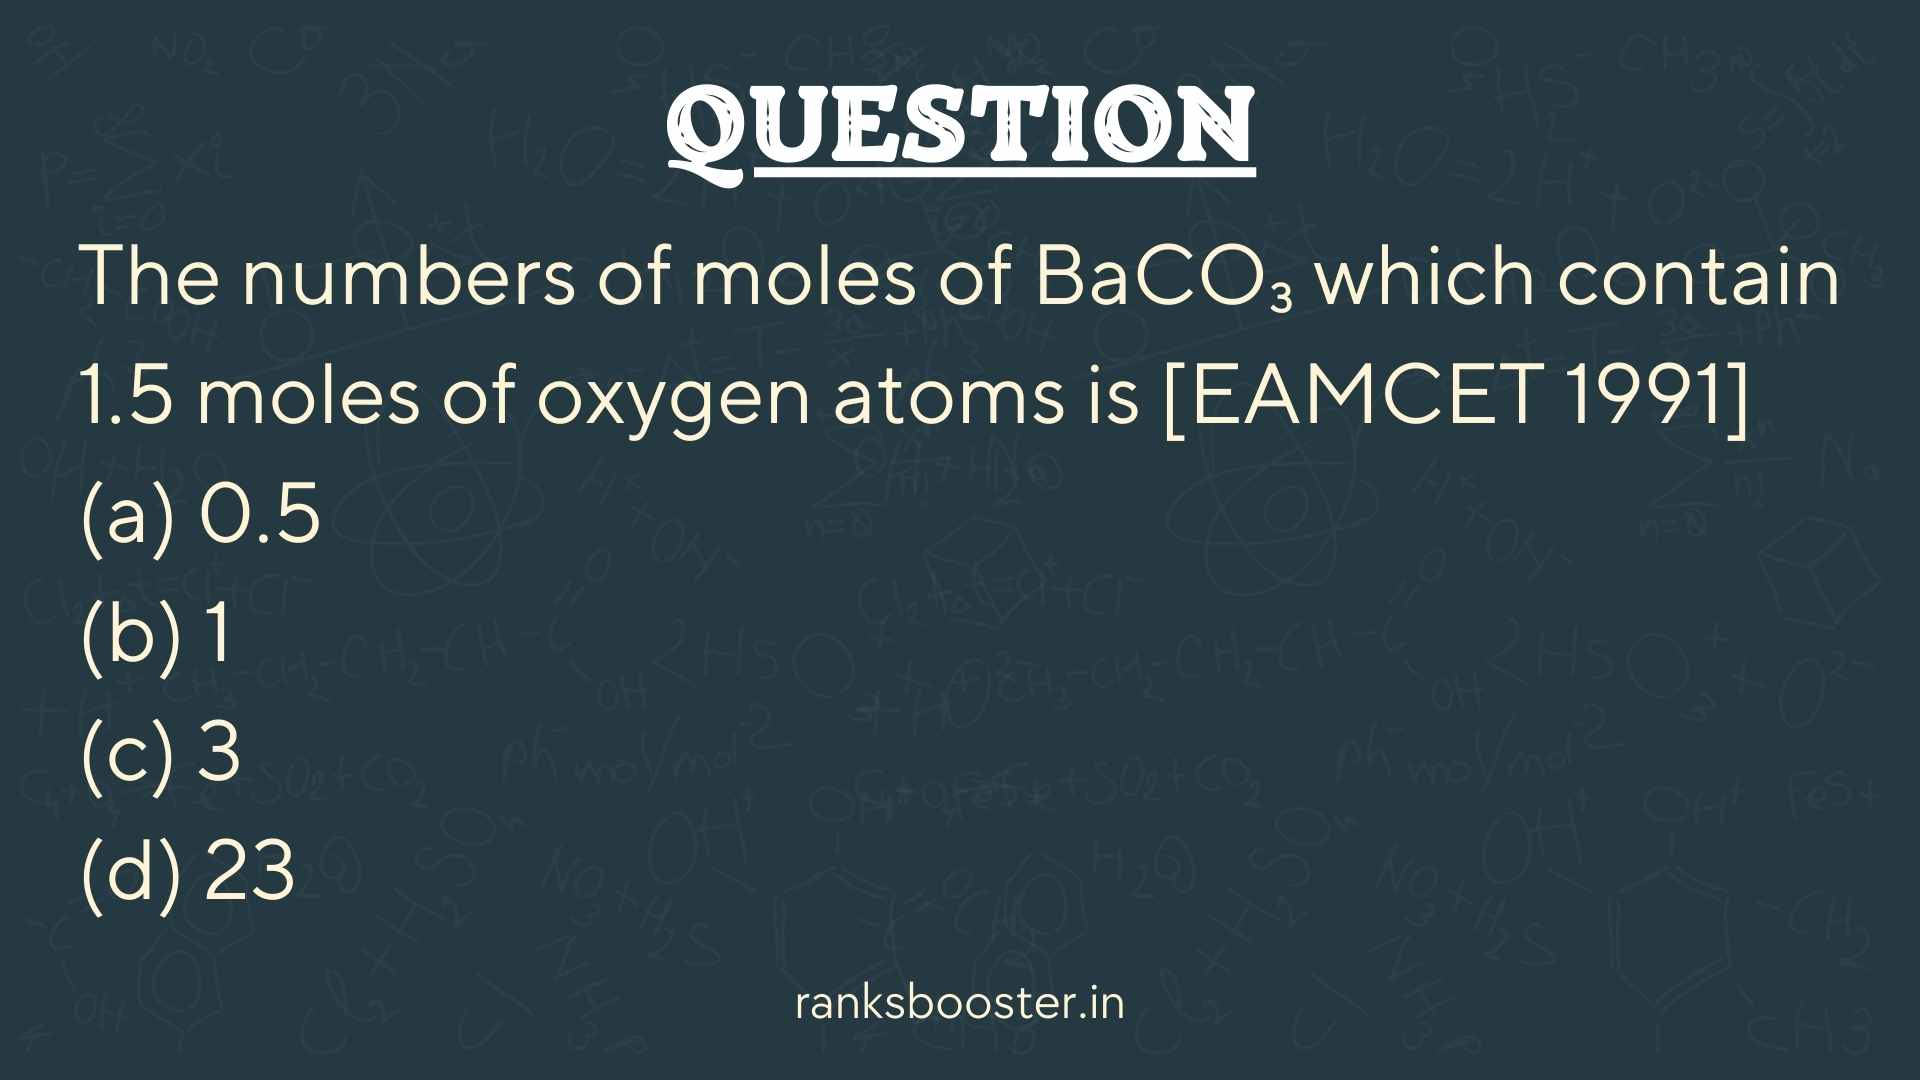 The numbers of moles of BaCO₃ which contain 1.5 moles of oxygen atoms is [EAMCET 1991] (a) 0.5 (b) 1 (c) 3 (d) 23